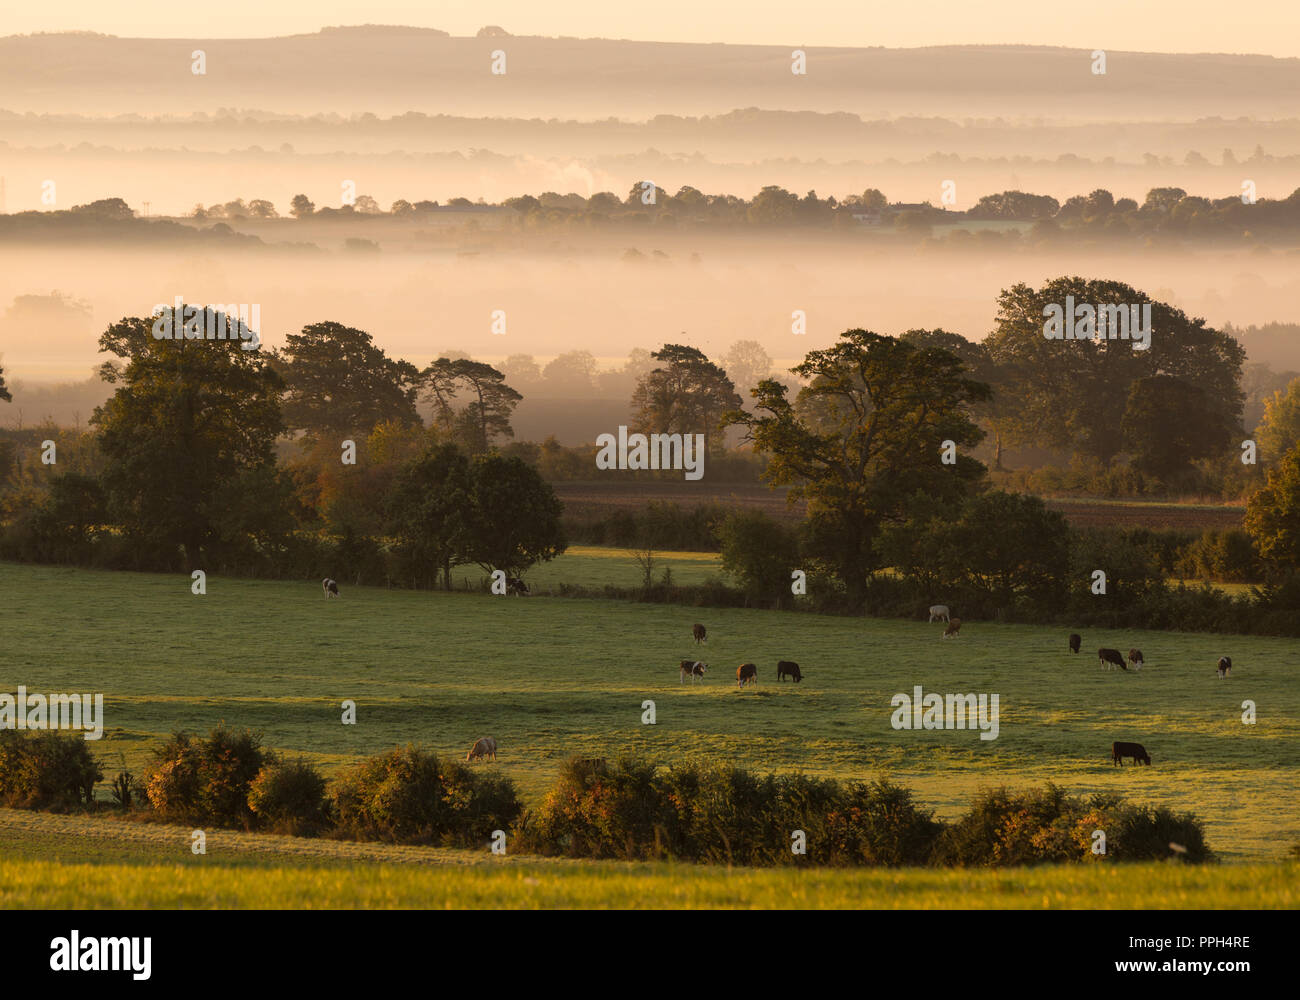 Wiltshire, UK. 26th September 2018, Monkton Farleigh Wiltshire. Cooler overnight temperatures created stunning mist and fog patches that settled in the rural landscape of Monkton Farleigh and beyond into Wiltshire. The rising sun caused the fog to glow orange initially before fading to white as the track of the sun rose higher. credit: Wayne Farrell/Alamy Live News Stock Photo